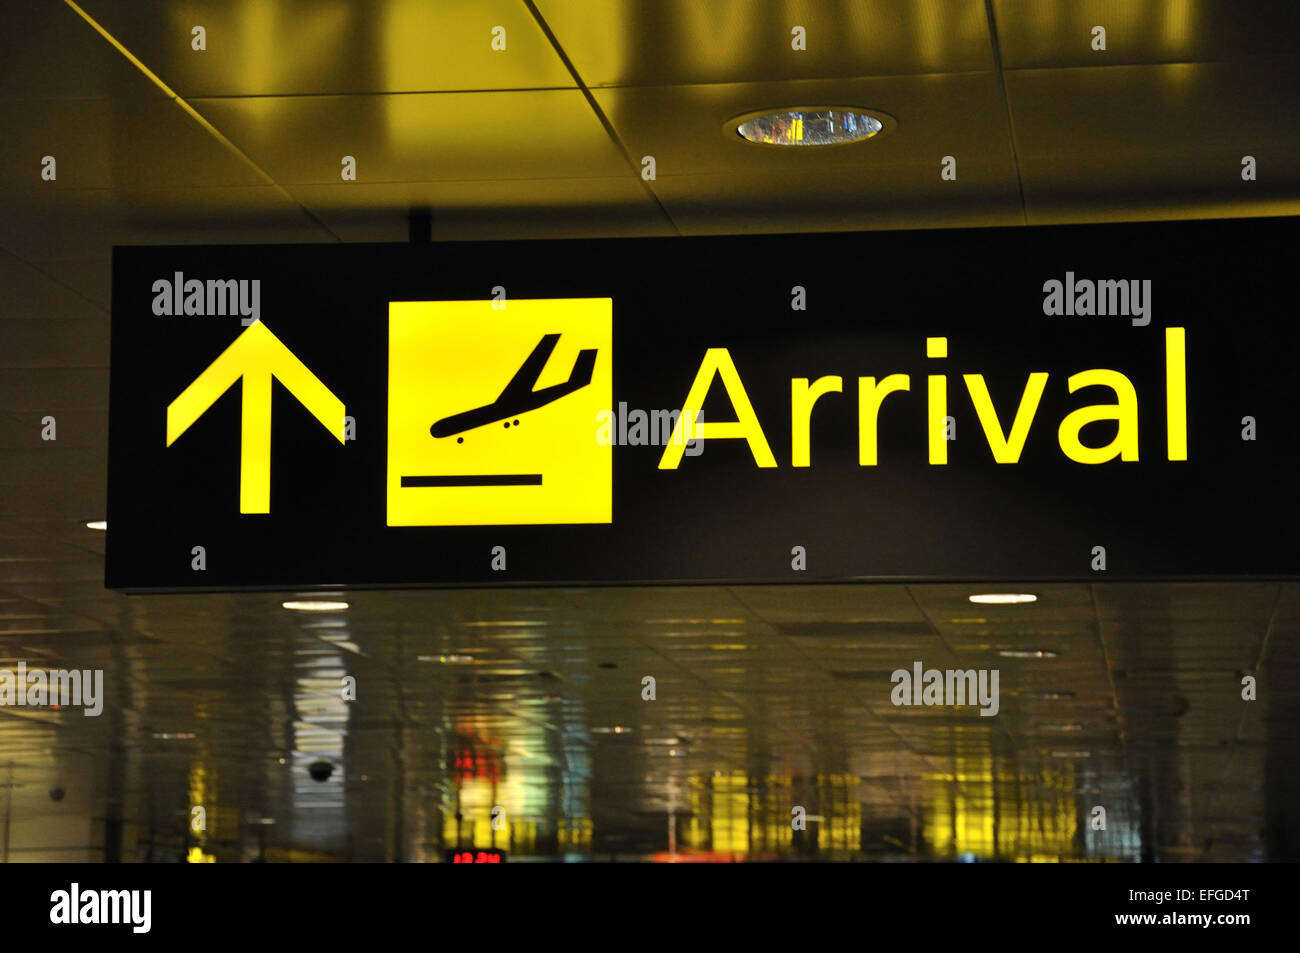 directions for passengers arriving at an airport Stock Photo